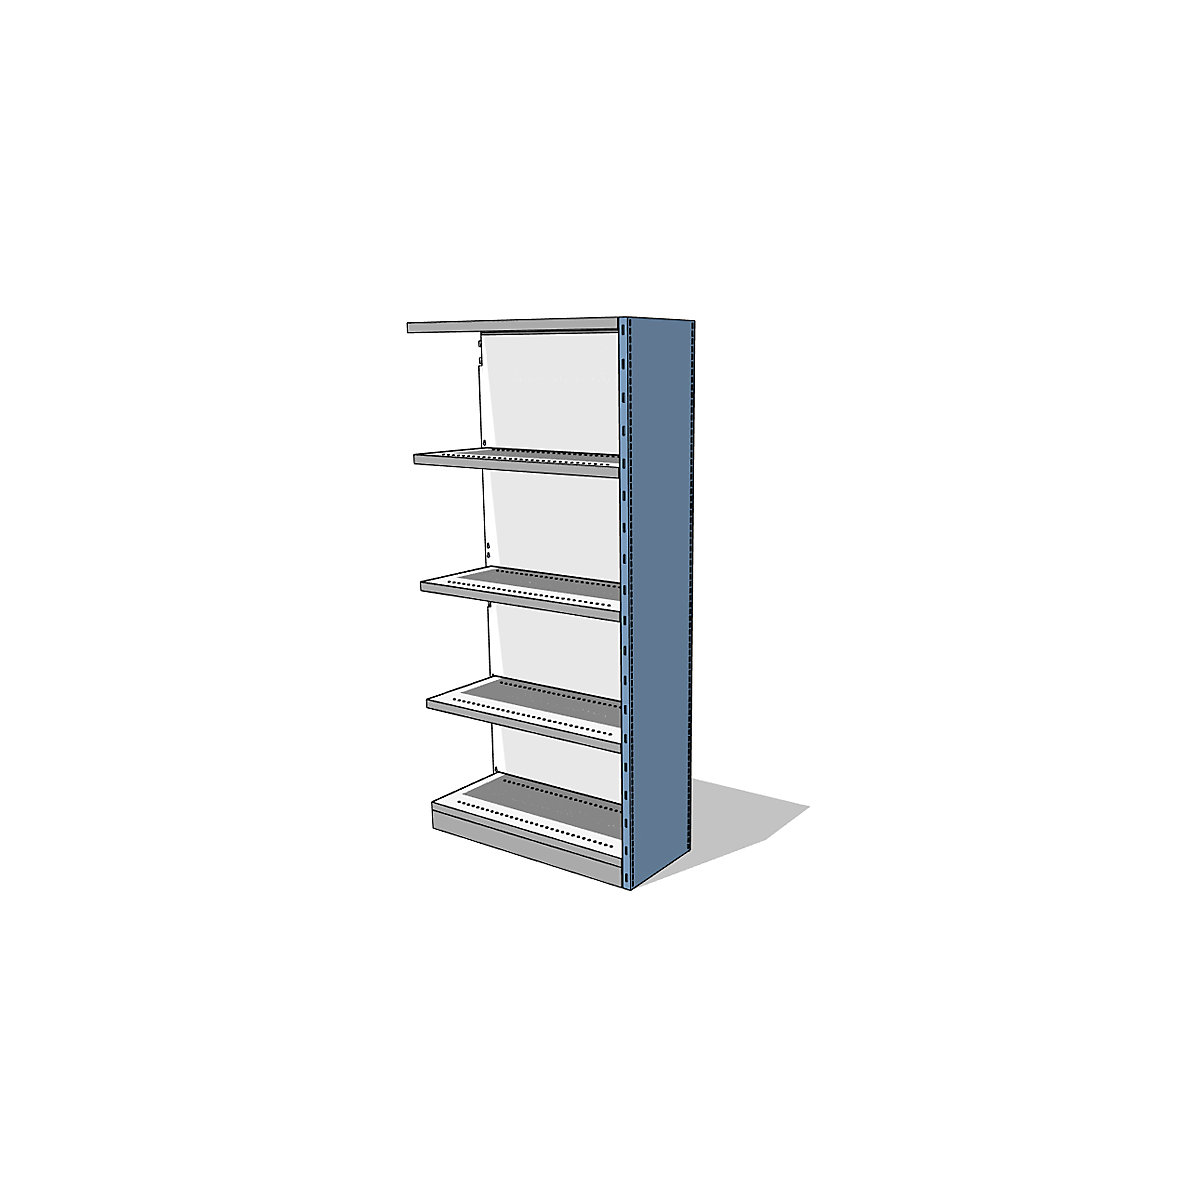 Office shelving cupboard system with rear and side walls